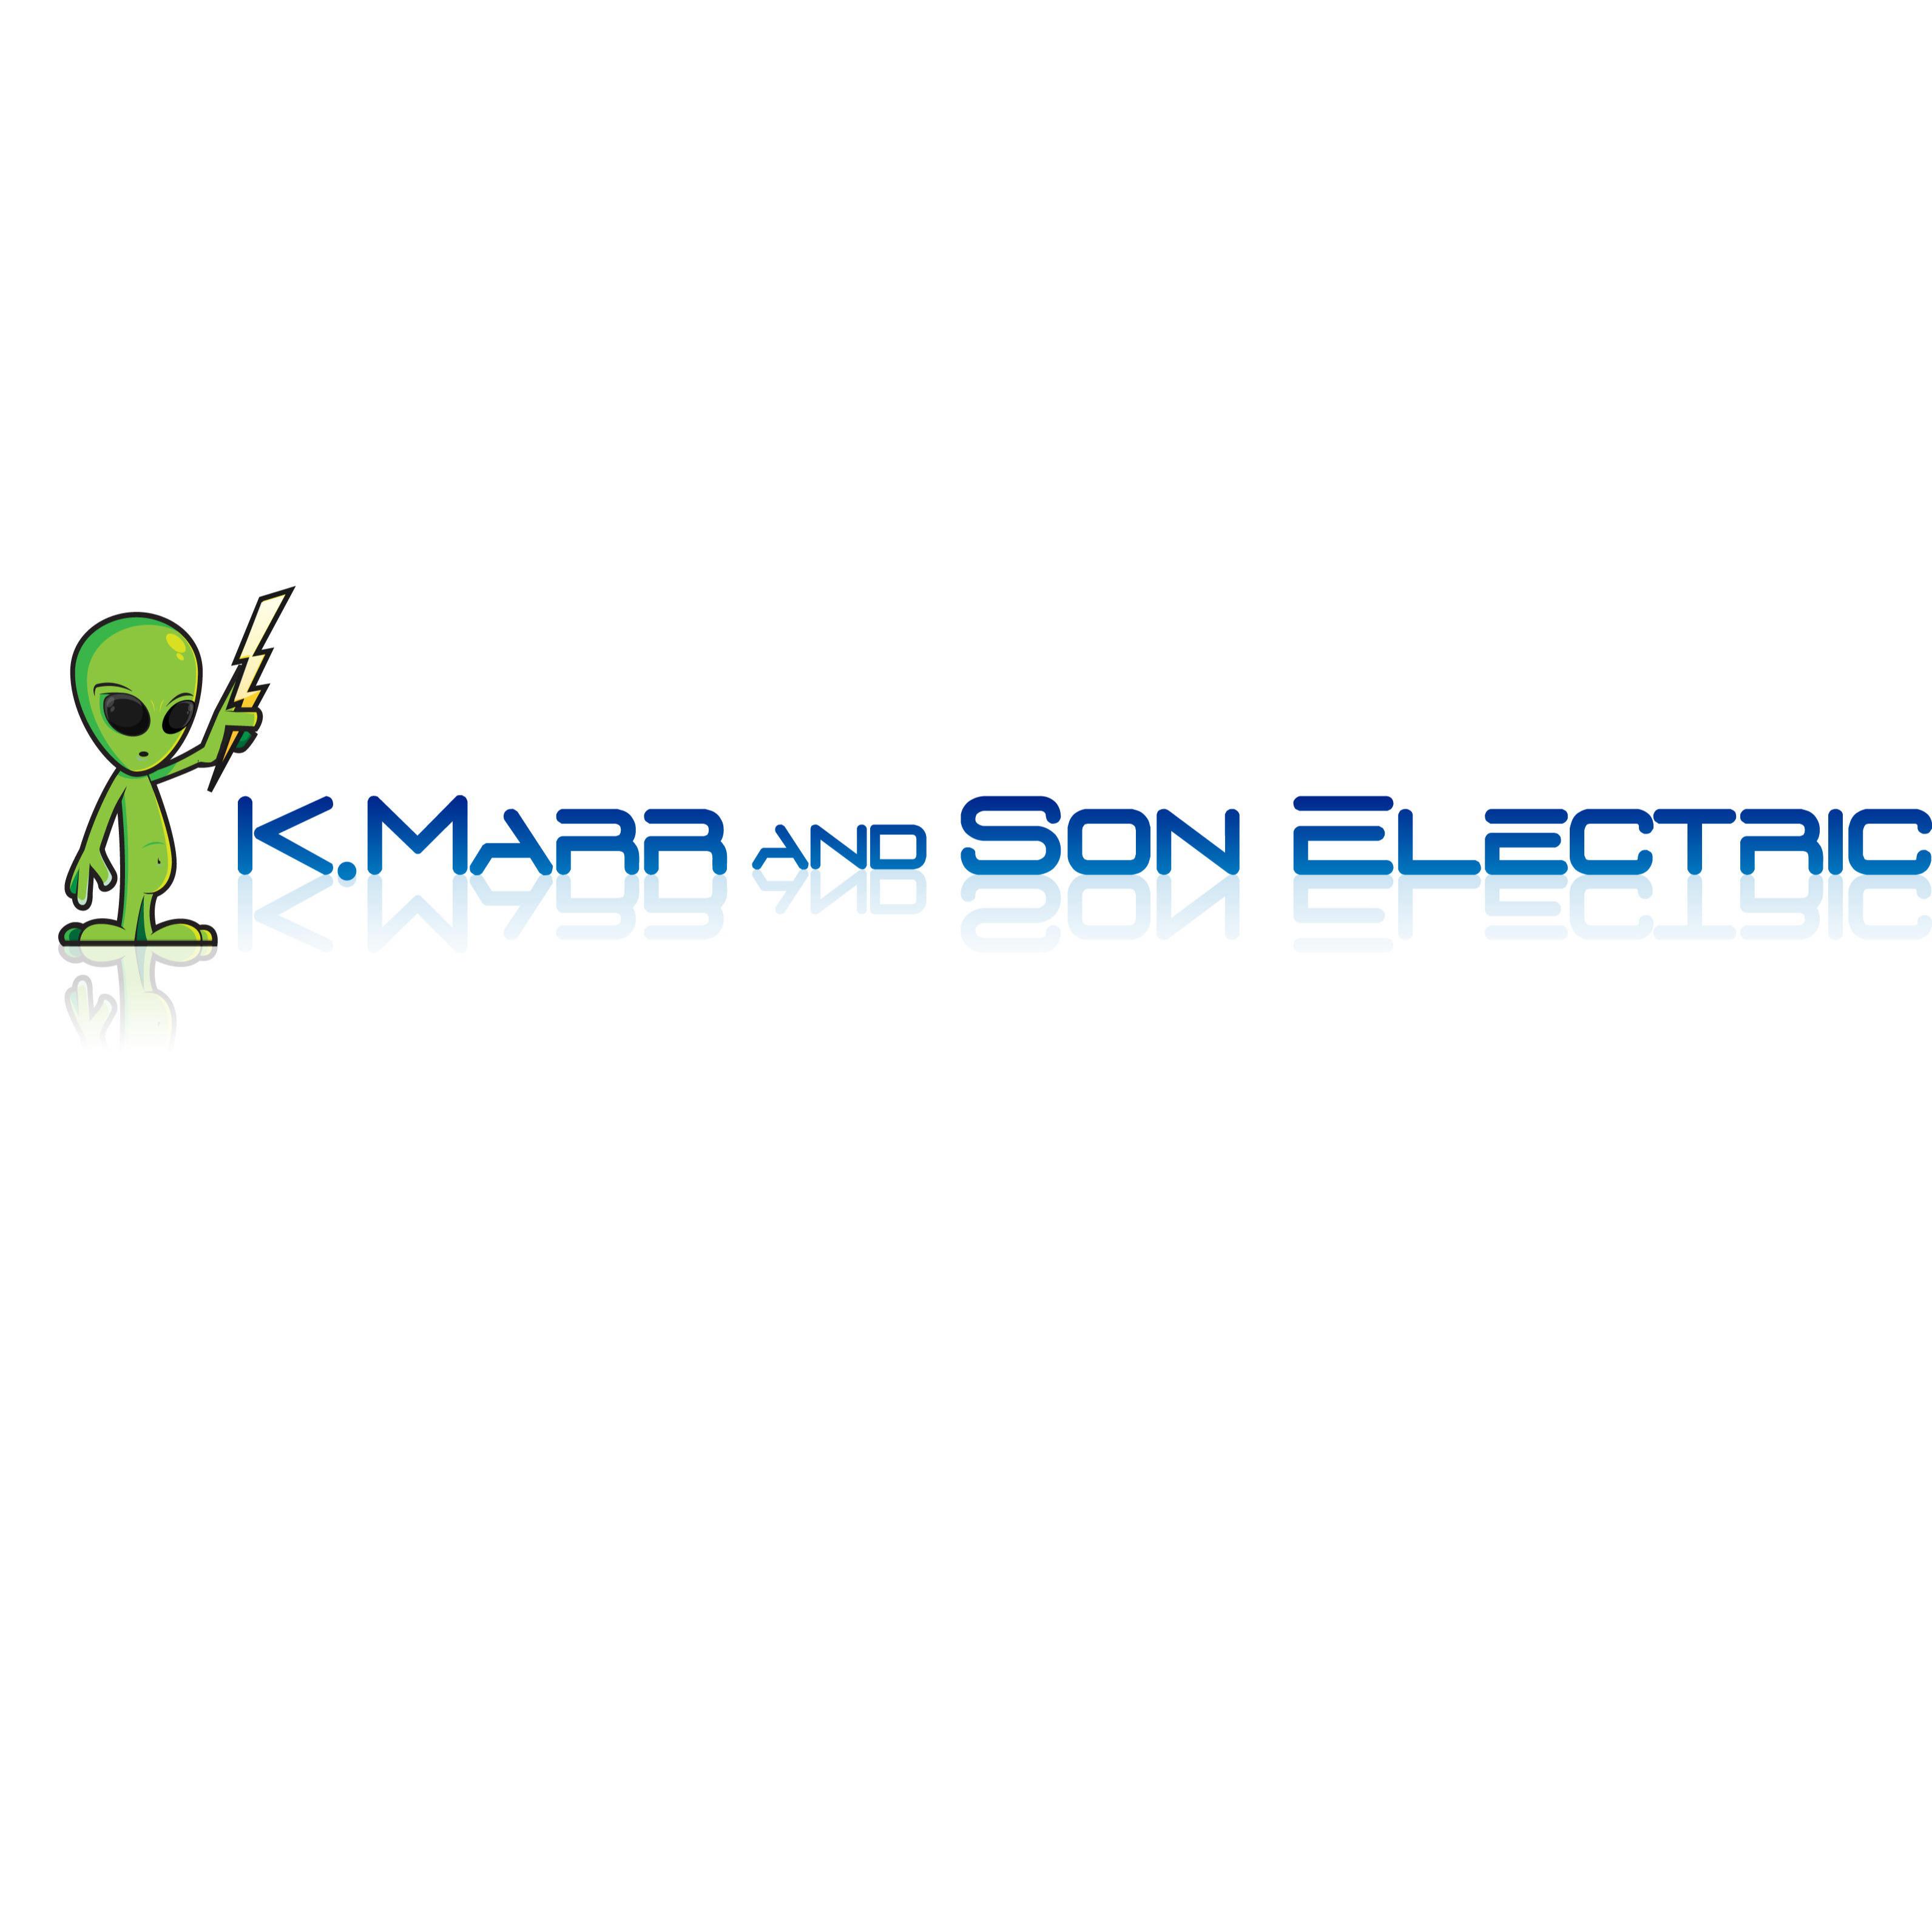 K.MARR AND SON ELECTRIC